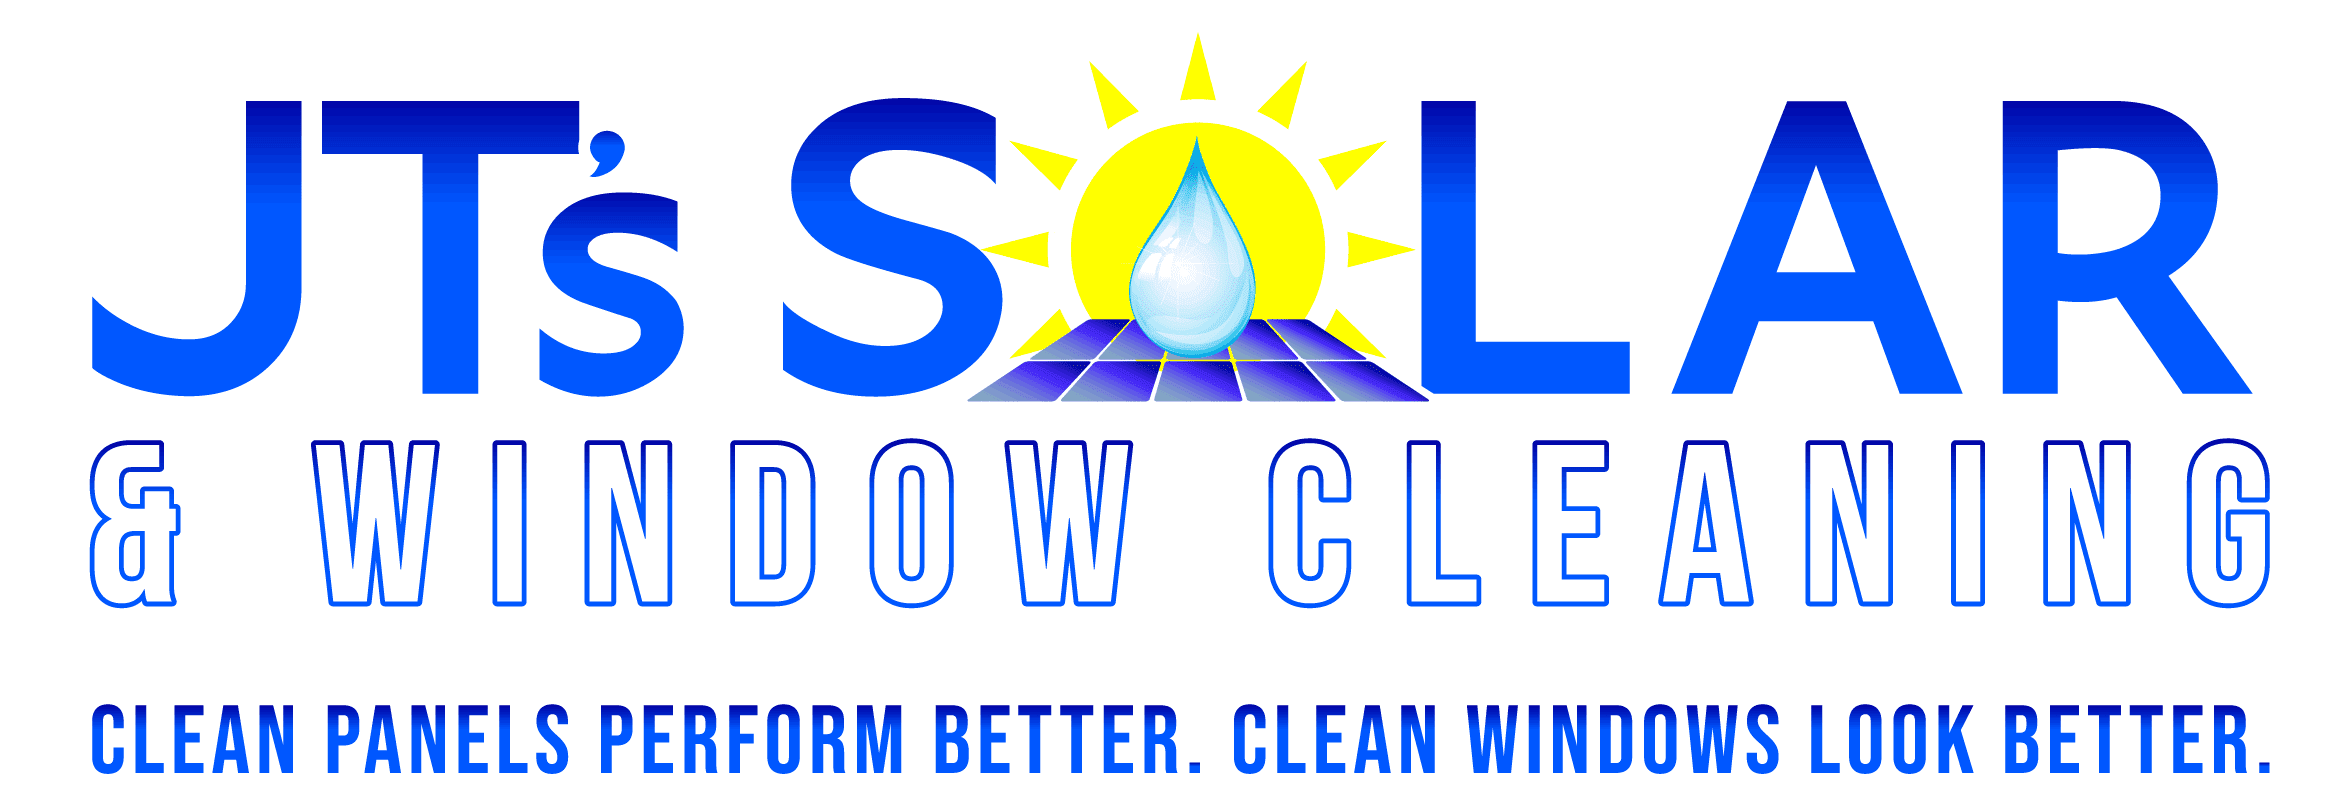 JT's Solar Cleaning